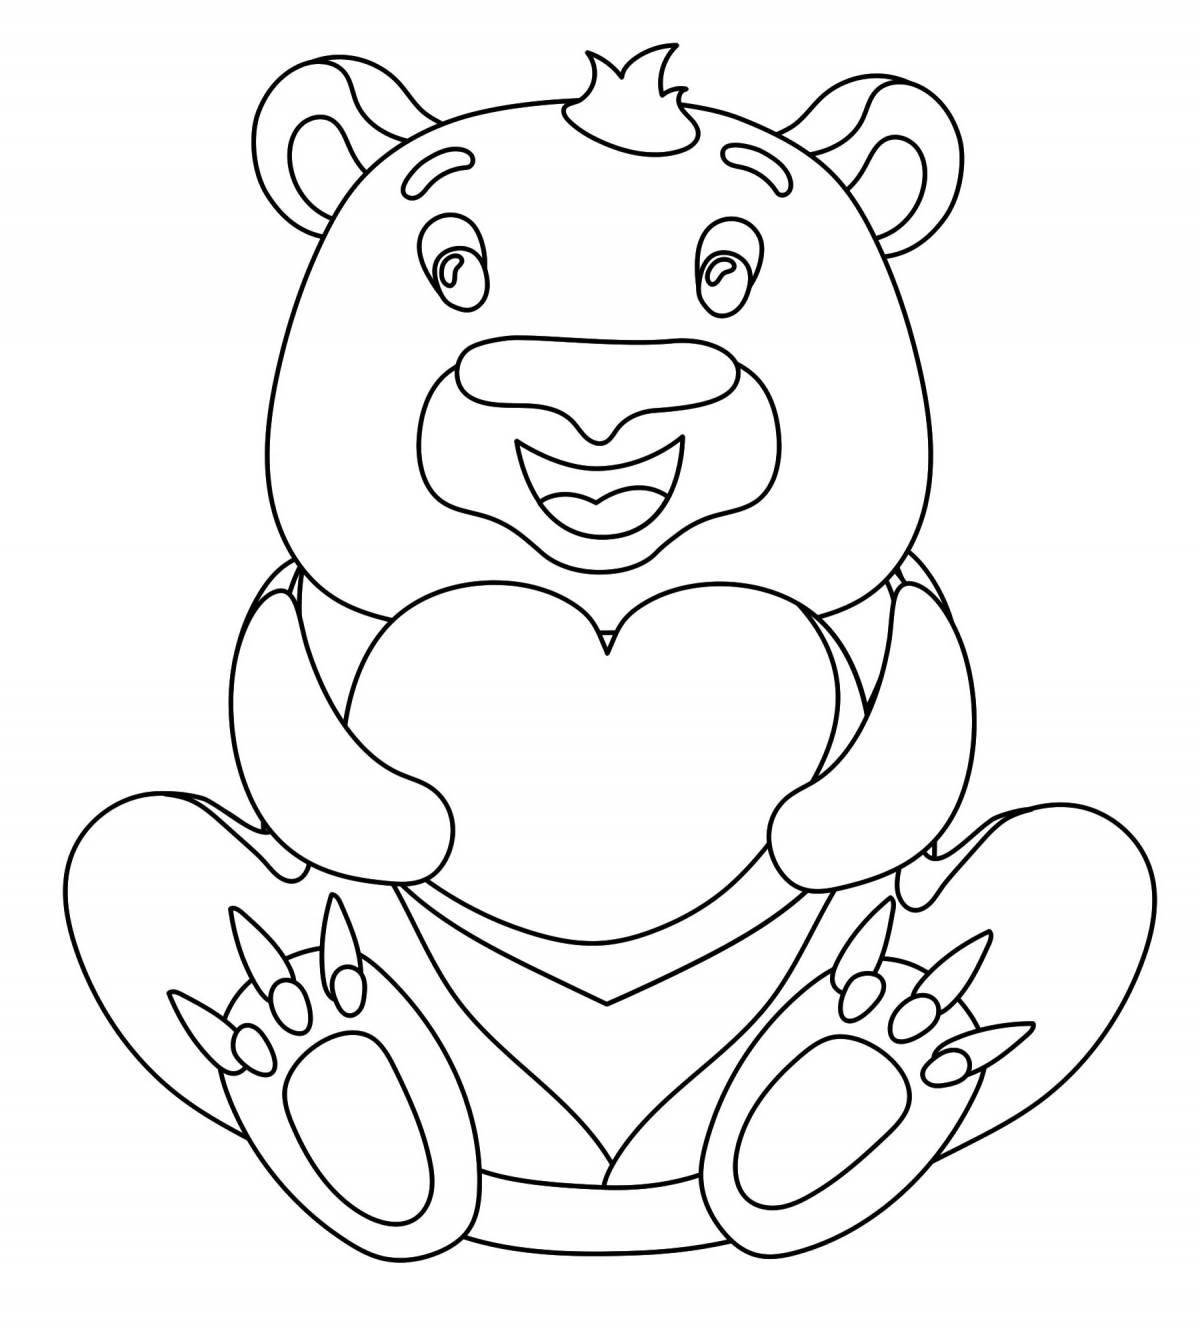 Coloring page happy teddy bear with a heart